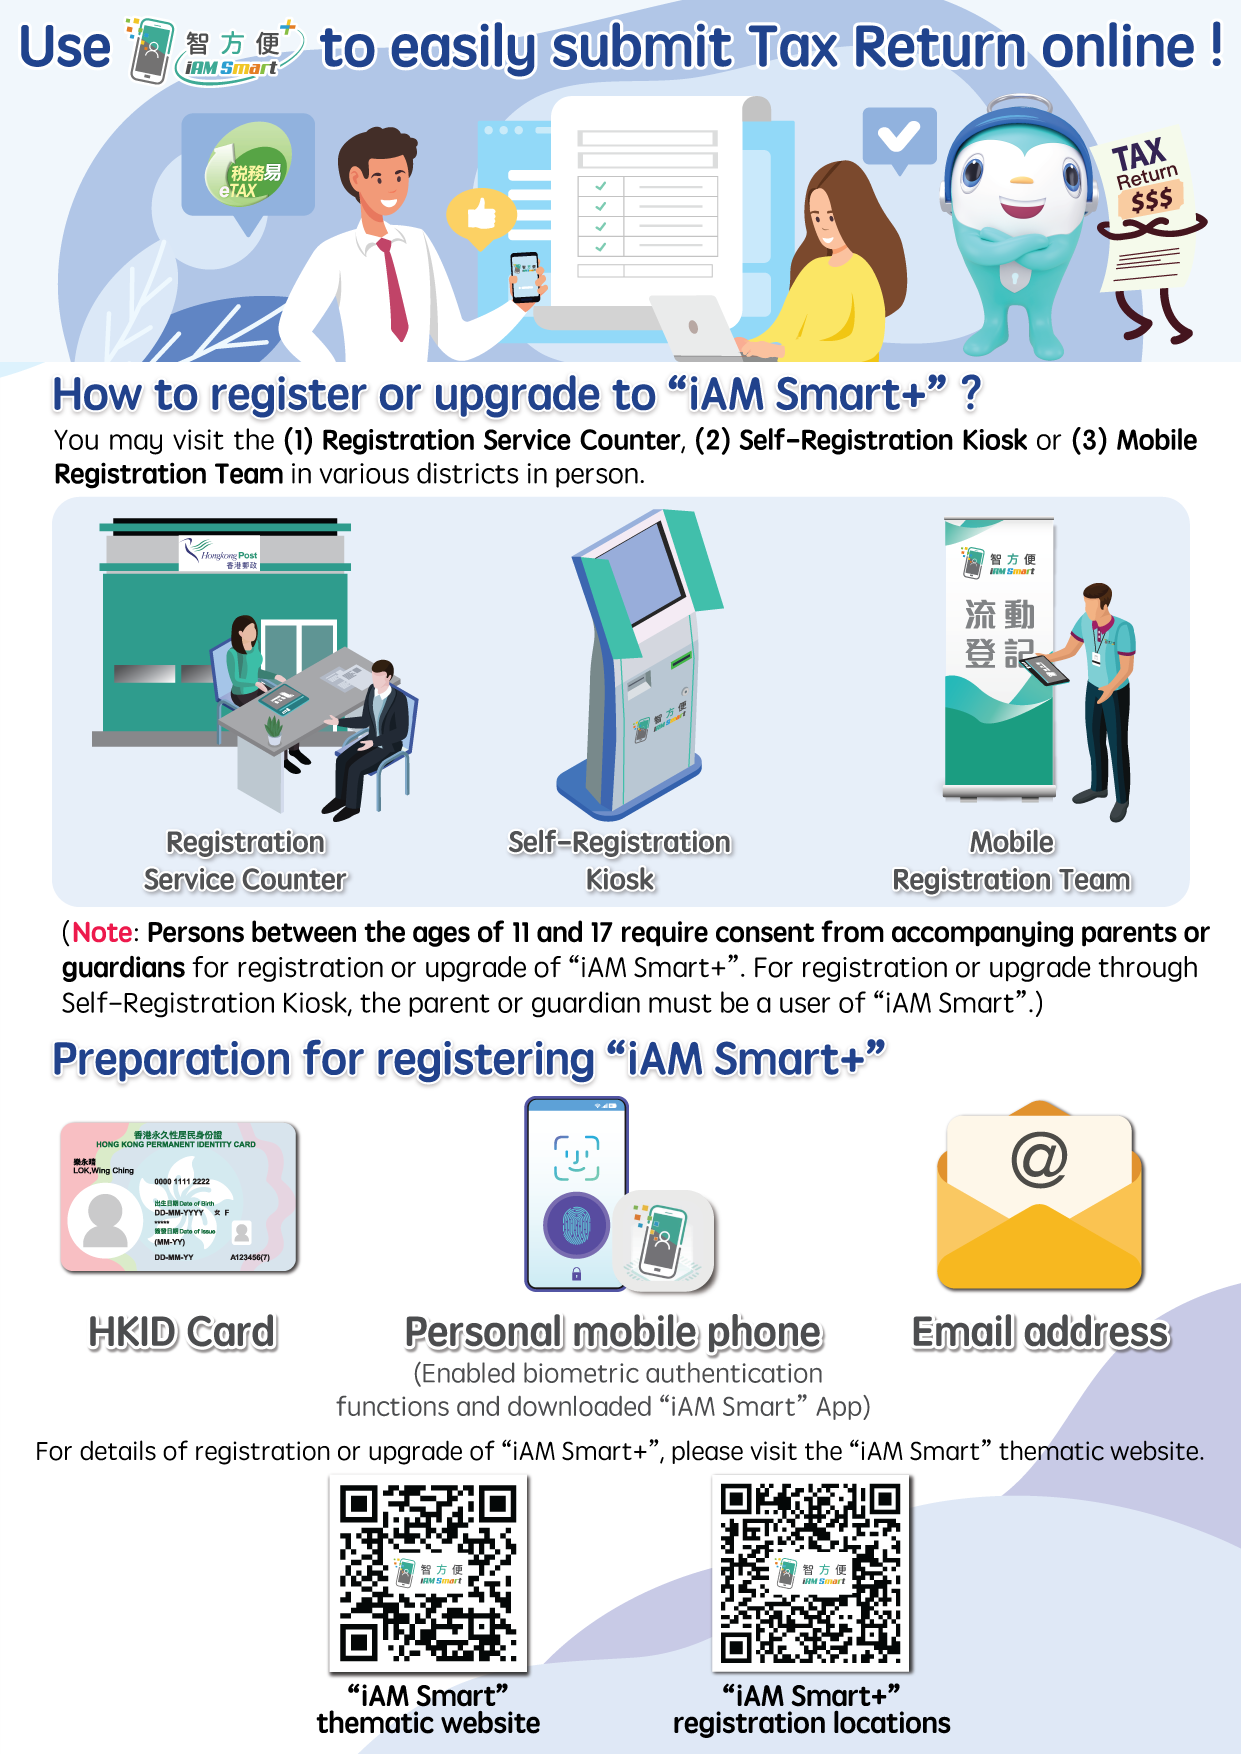 Use "iAM Smart+" to easily submit tax return online